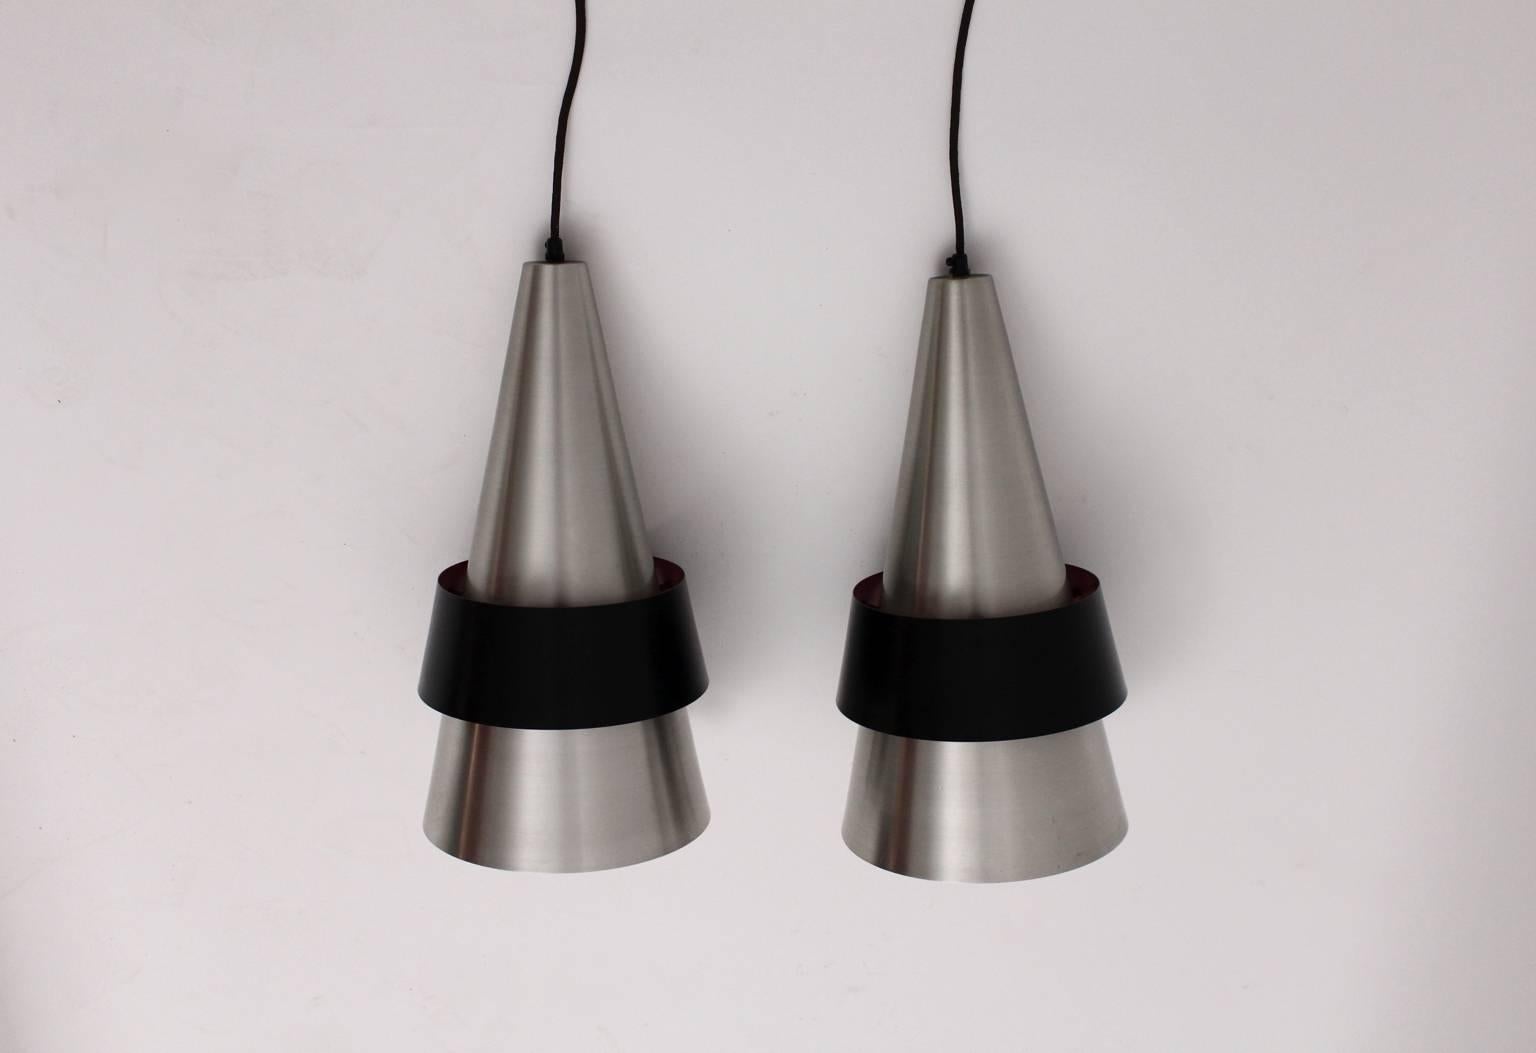 
The pair of Scandinavian modern vintage metal pendants Corona were designed by Jo Hammerborg, Denmark, 1960s and executed by Fog & Morup, Denmark.
Also these pendants were made of stainless steel and sheet metal black lacquered with plastic.
Each